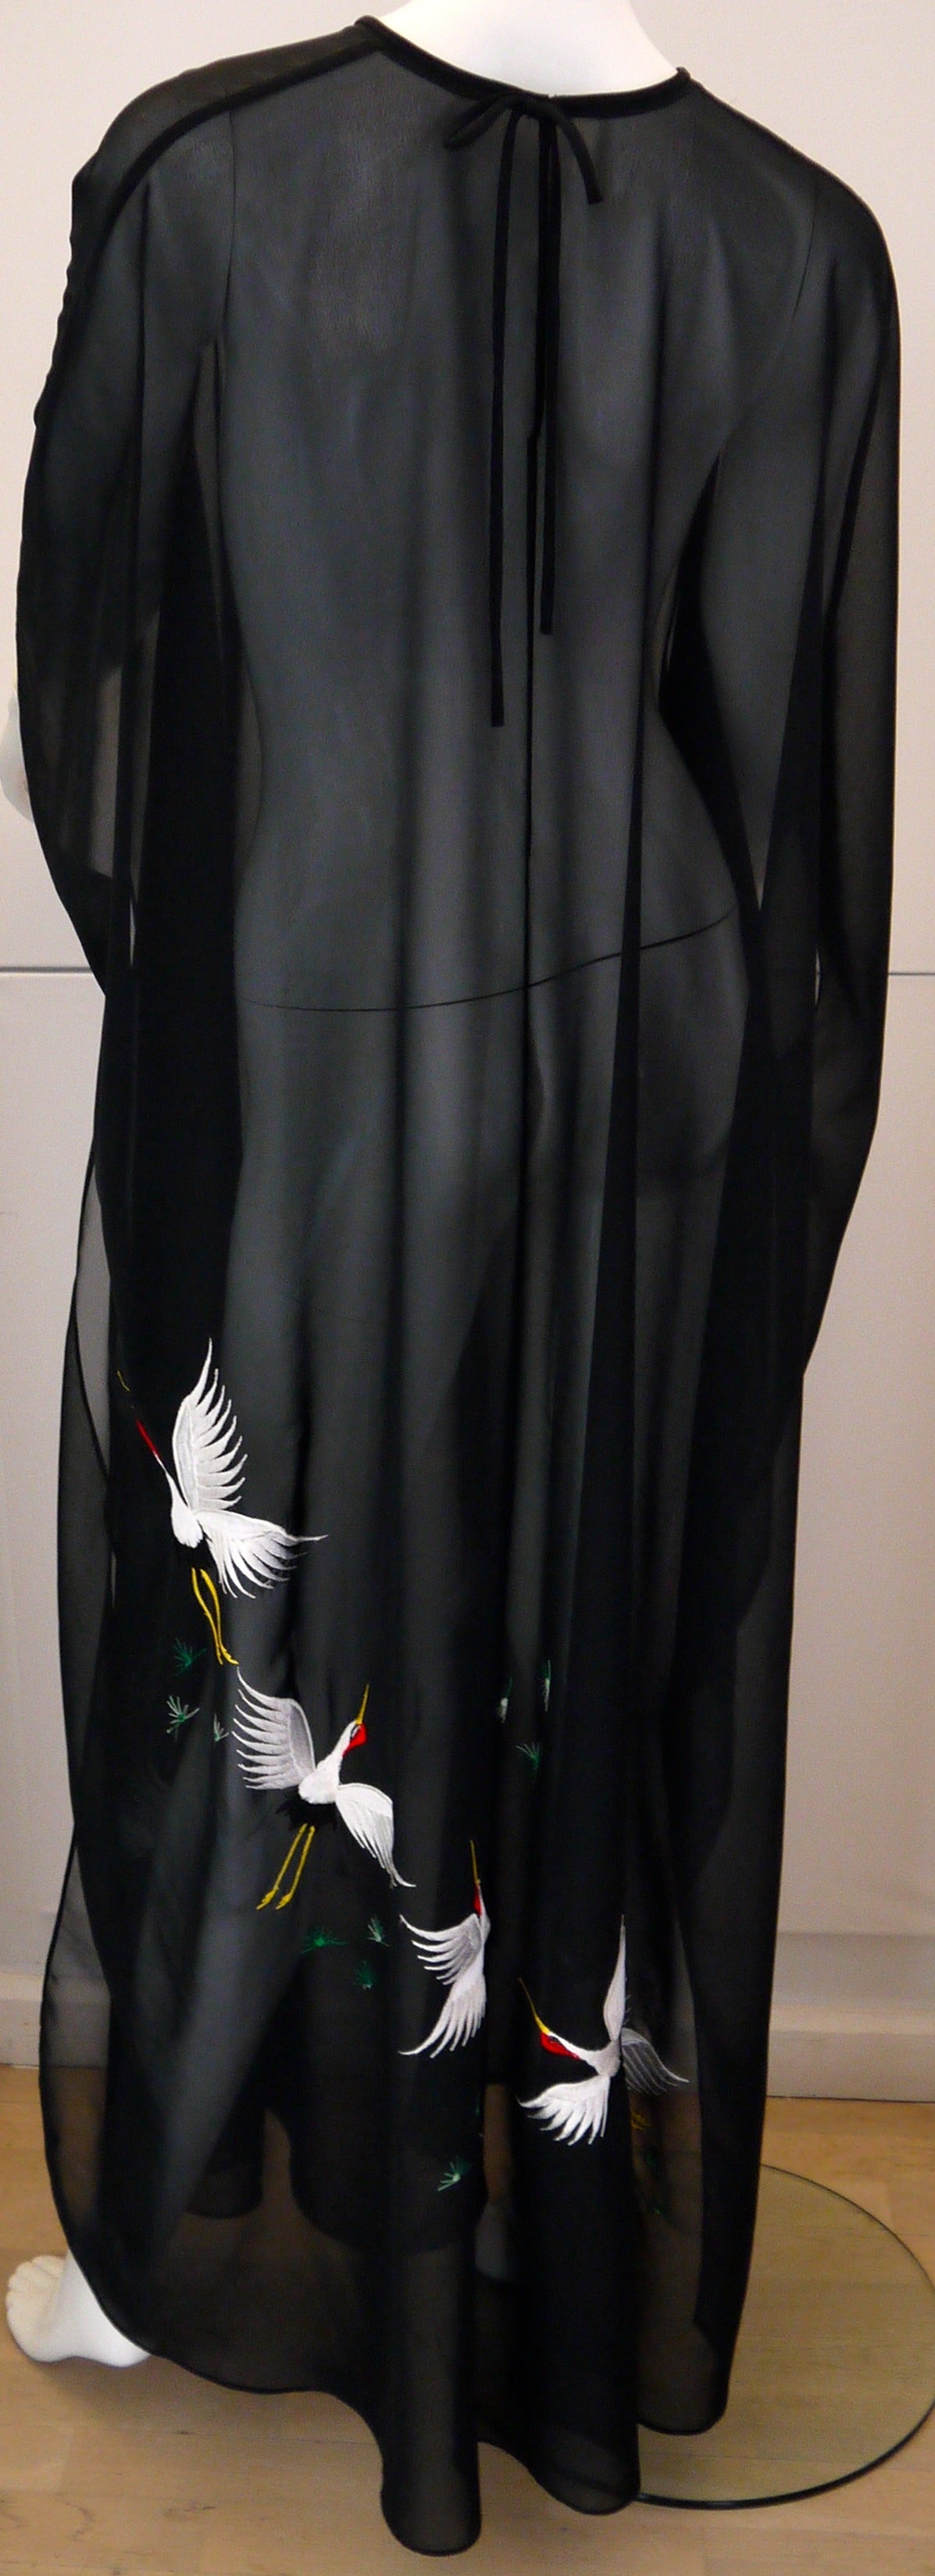 Presented here is a very unique and interesting piece from the 1970’s. It is a large size caftan which is a sheer black. It is meant to be worn over a bathing suit or other items of clothing due to the fact that it is see-through. It has a single